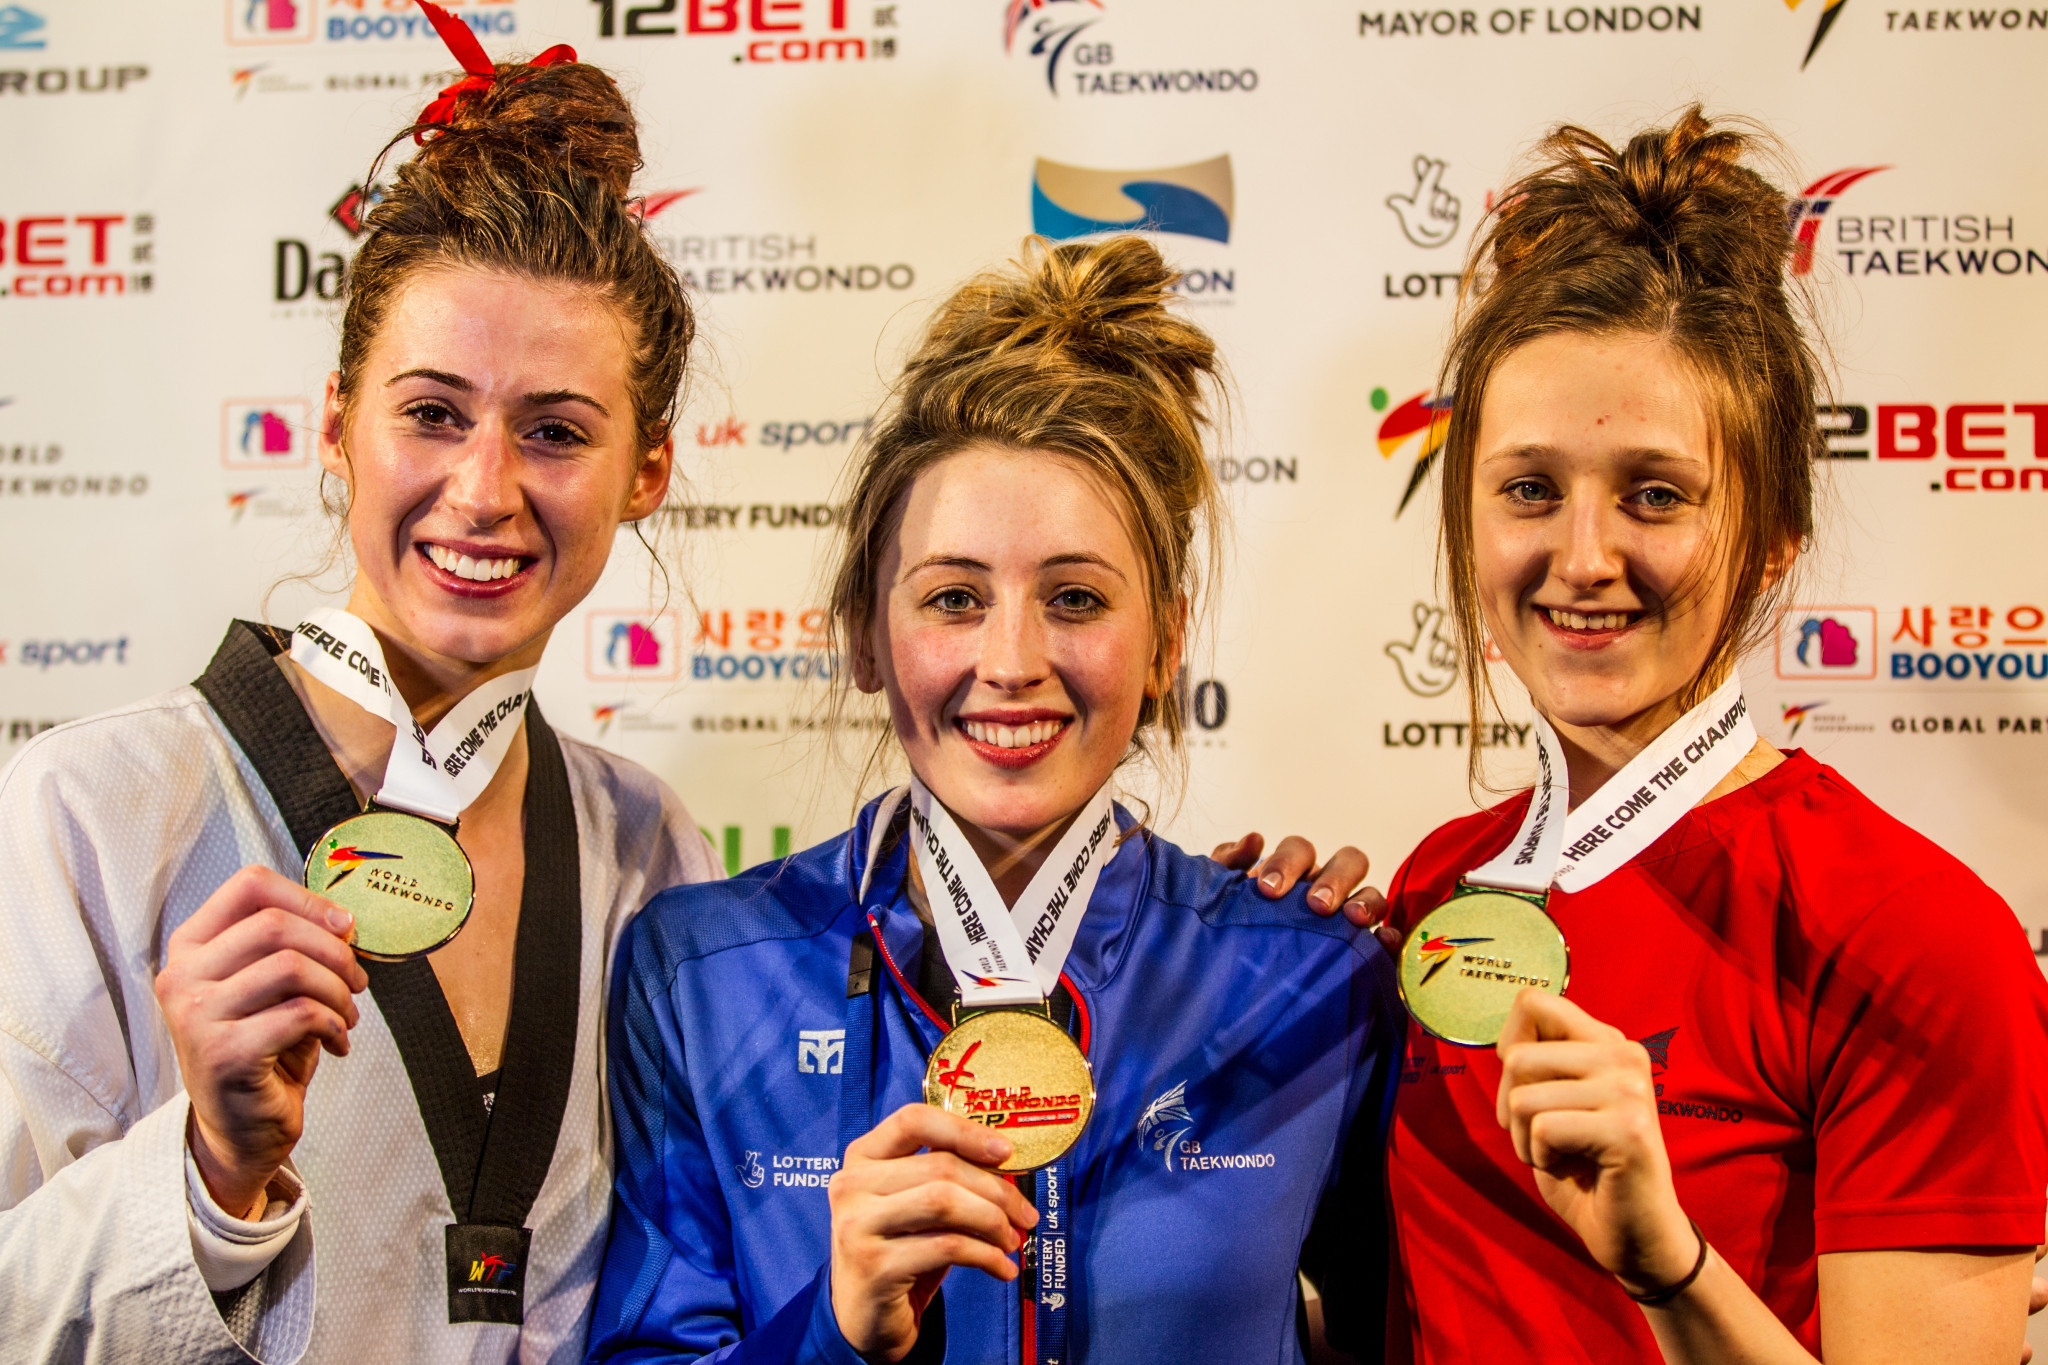 Bianca Walkden, left, and Jade Jones, centre, both won gold medals today at the World Taekwondo Grand Prix series event in London, increasing hosts Great Britain's gold medal tally to three after success for Lauren Williams, right, yesterday ©GB Taekwondo